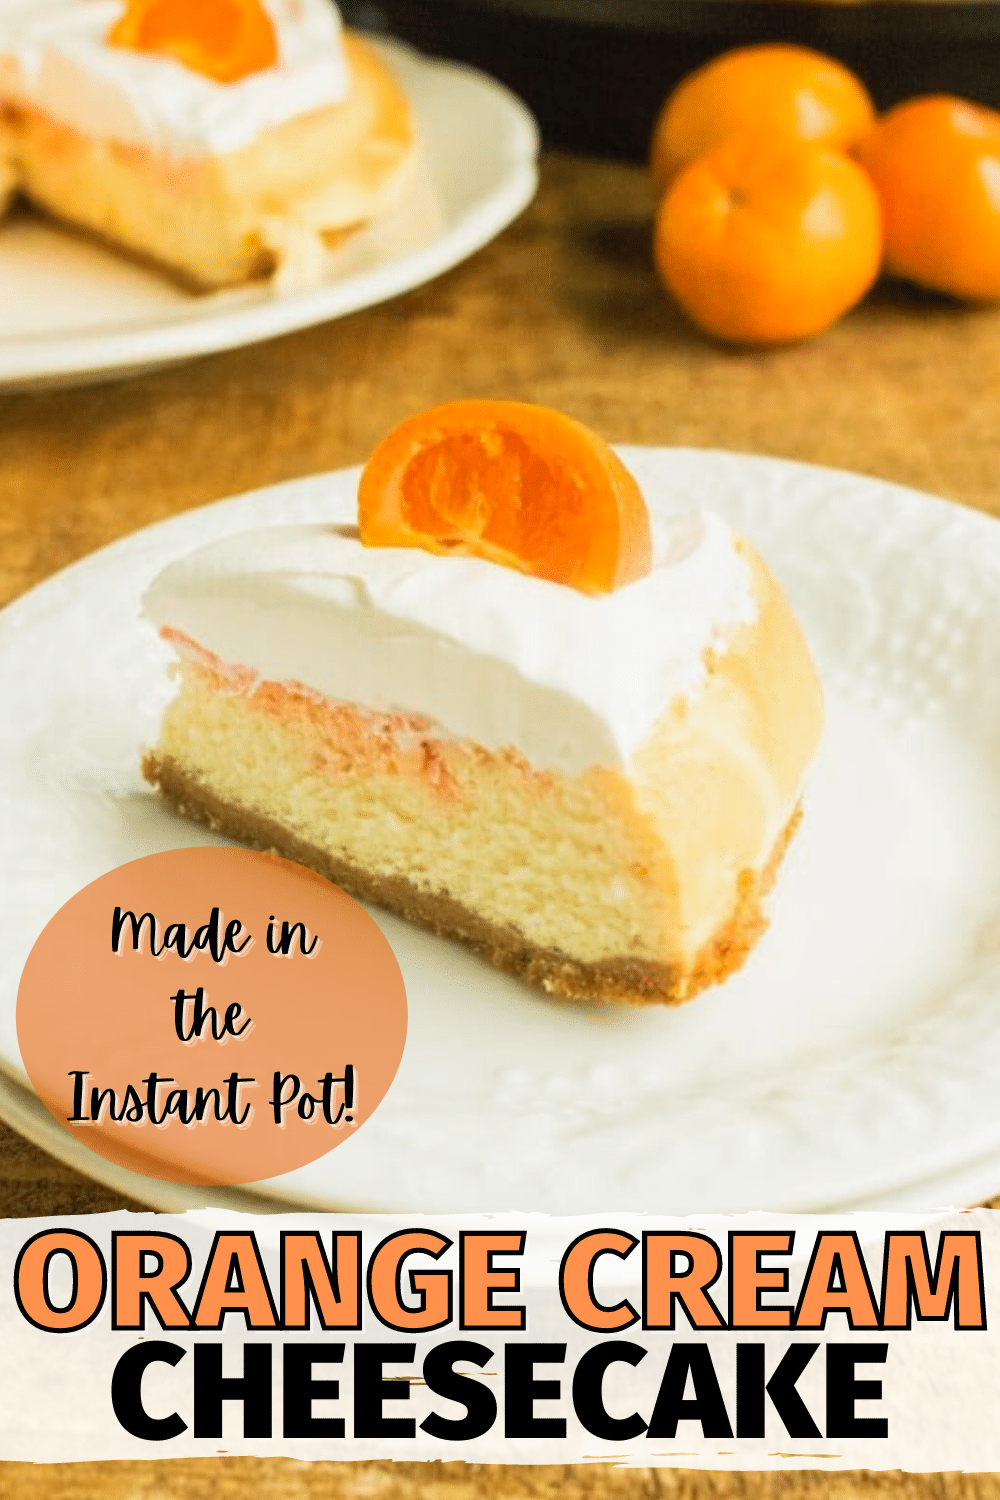 This Instant Pot Orange Cream Cheesecake has a fresh, light flavor that is perfect for warmer weather! Plus, the colorful orange garnish makes it just as pretty as it is delicious! #cheesecake #instantpot #pressurecooker #orangecream via @wondermomwannab